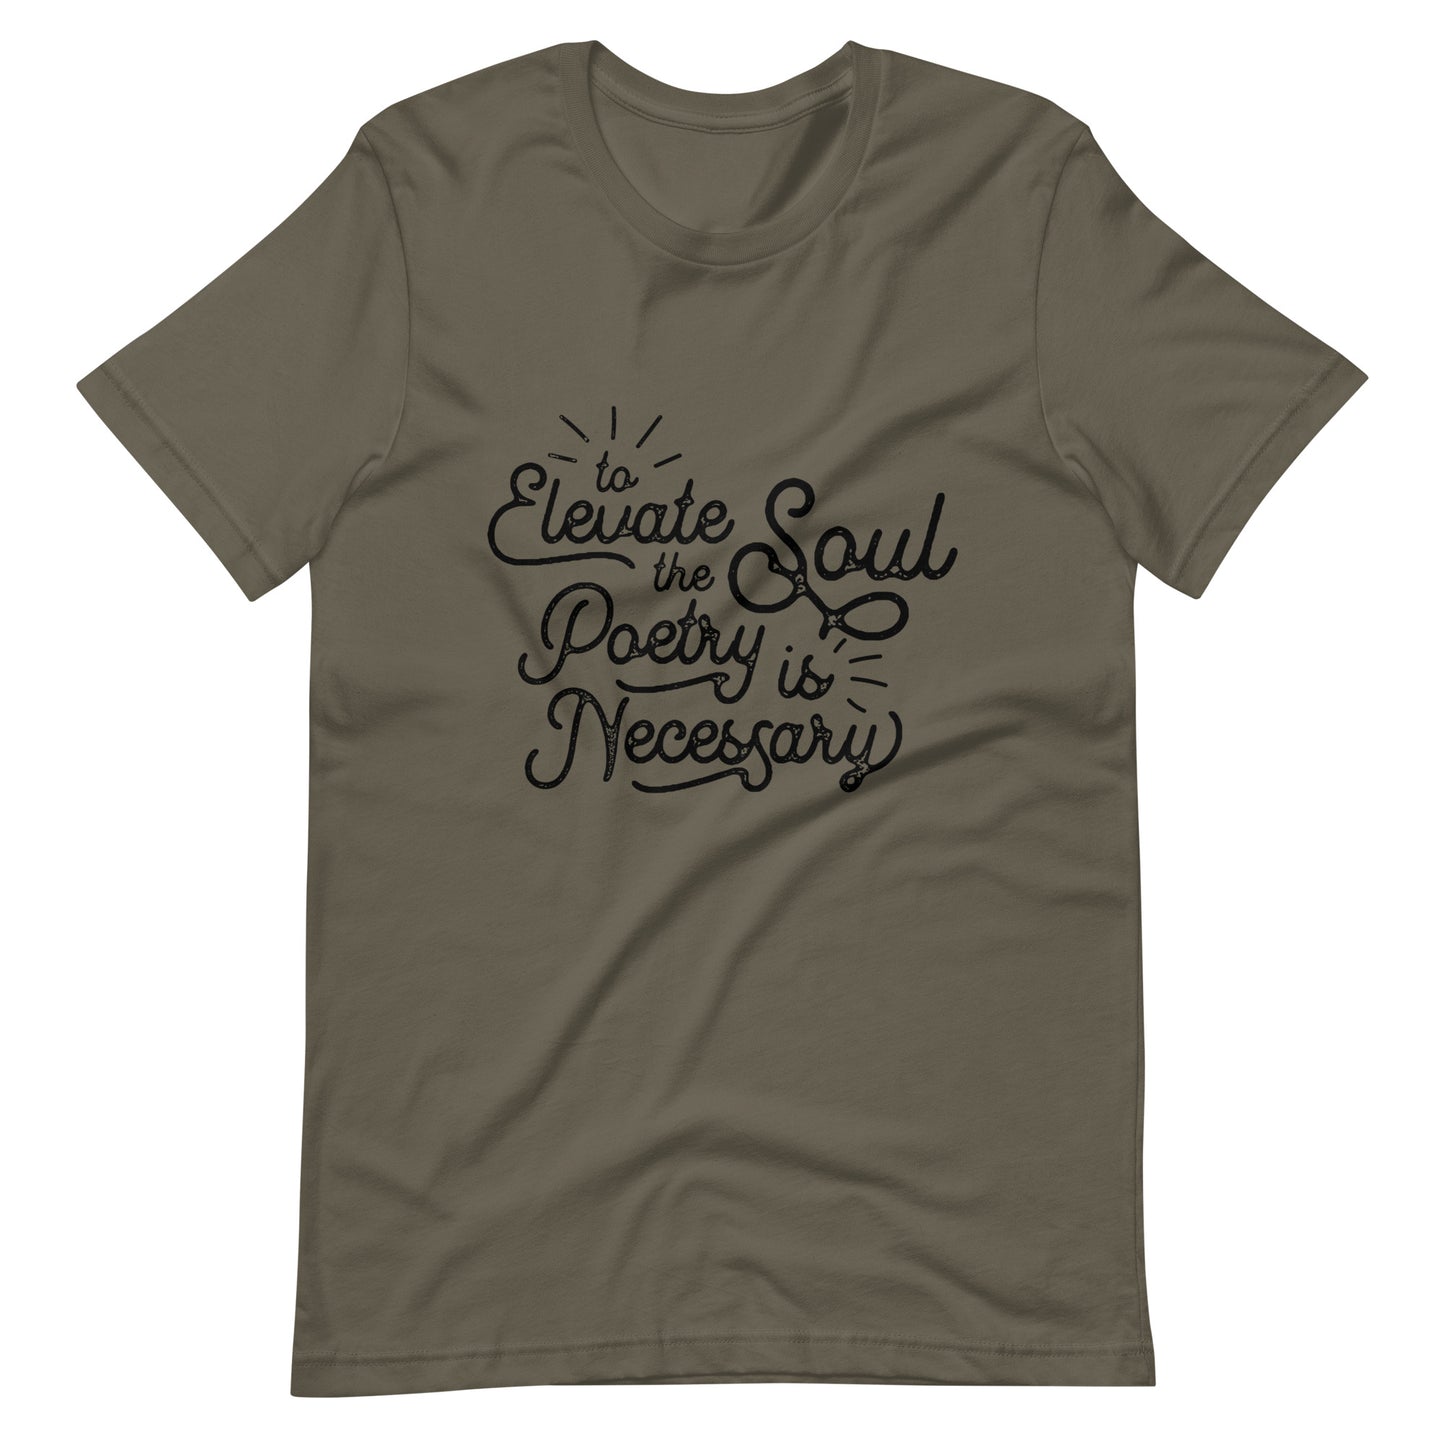 To Elevate the Soul Edgar Allan Poe Quote - Men's t-shirt - Army Front